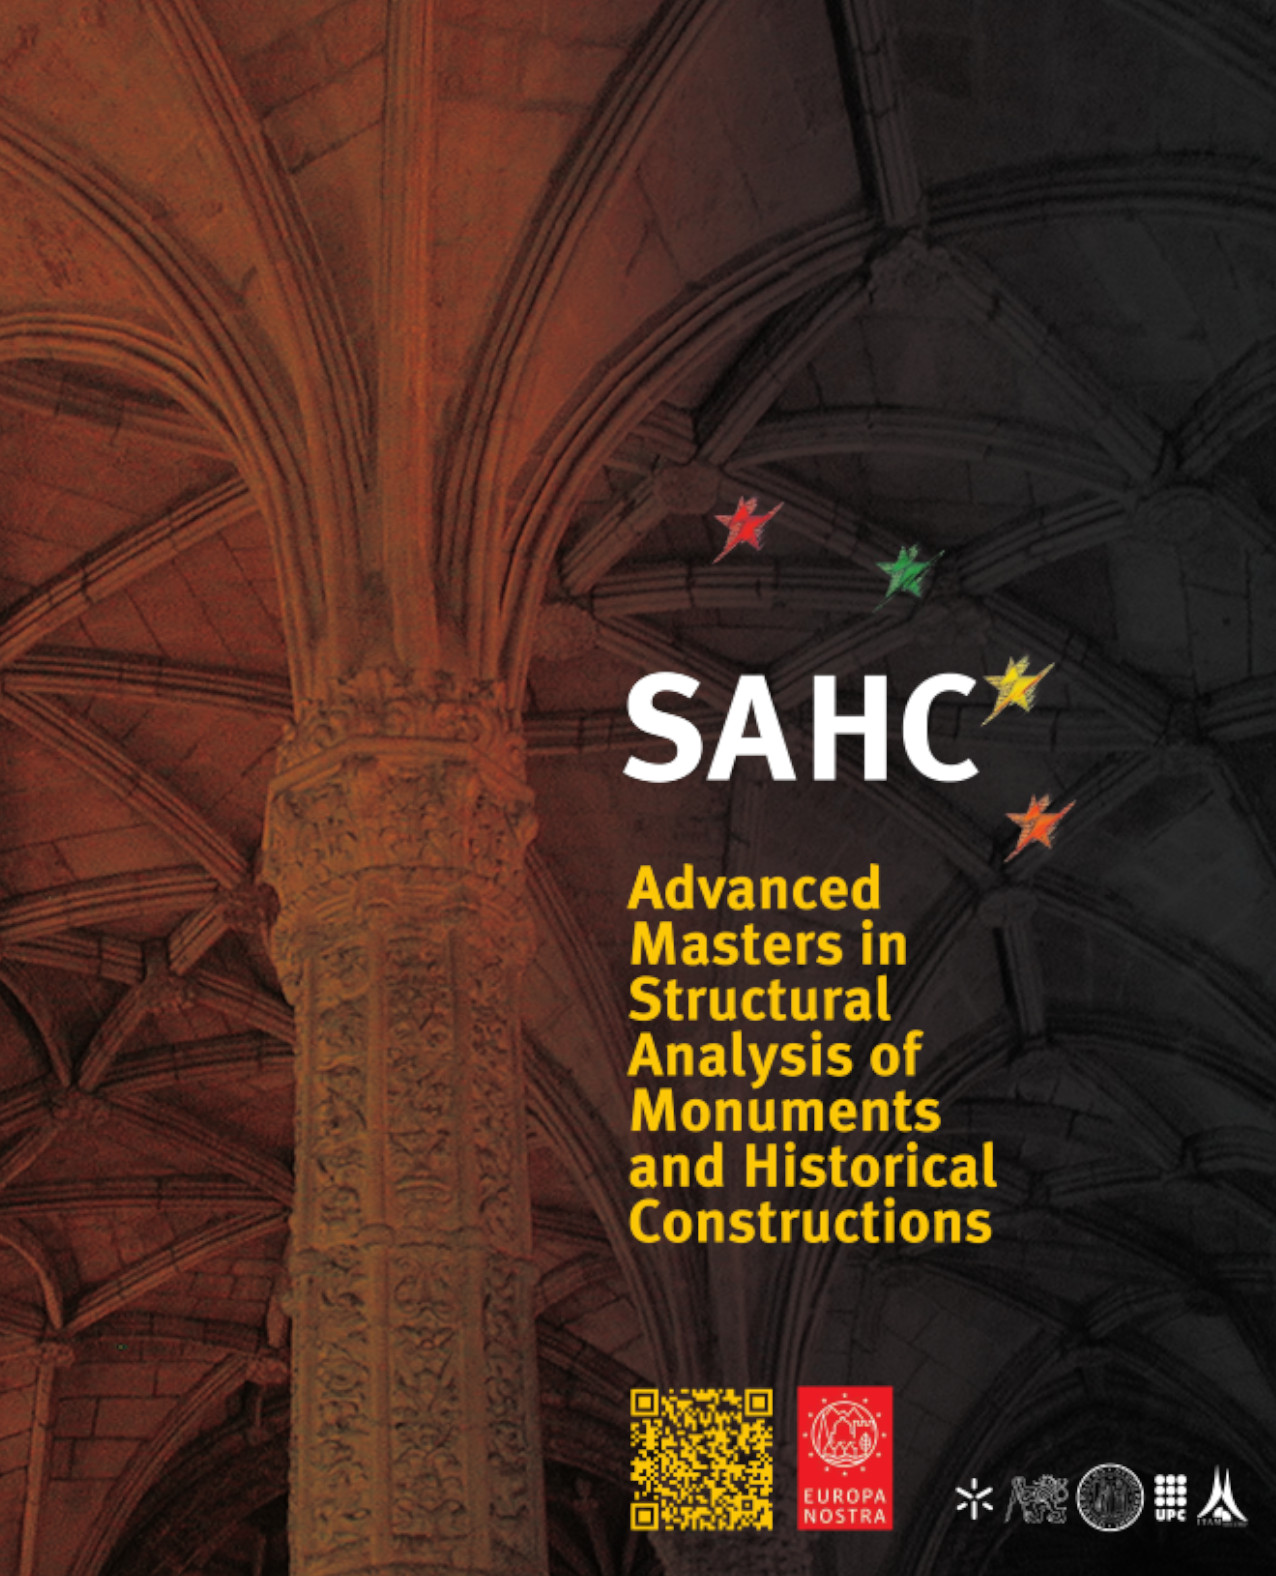 Brochure of the Master's Degree in Structural Analysis of Monuments & Historical Constructions